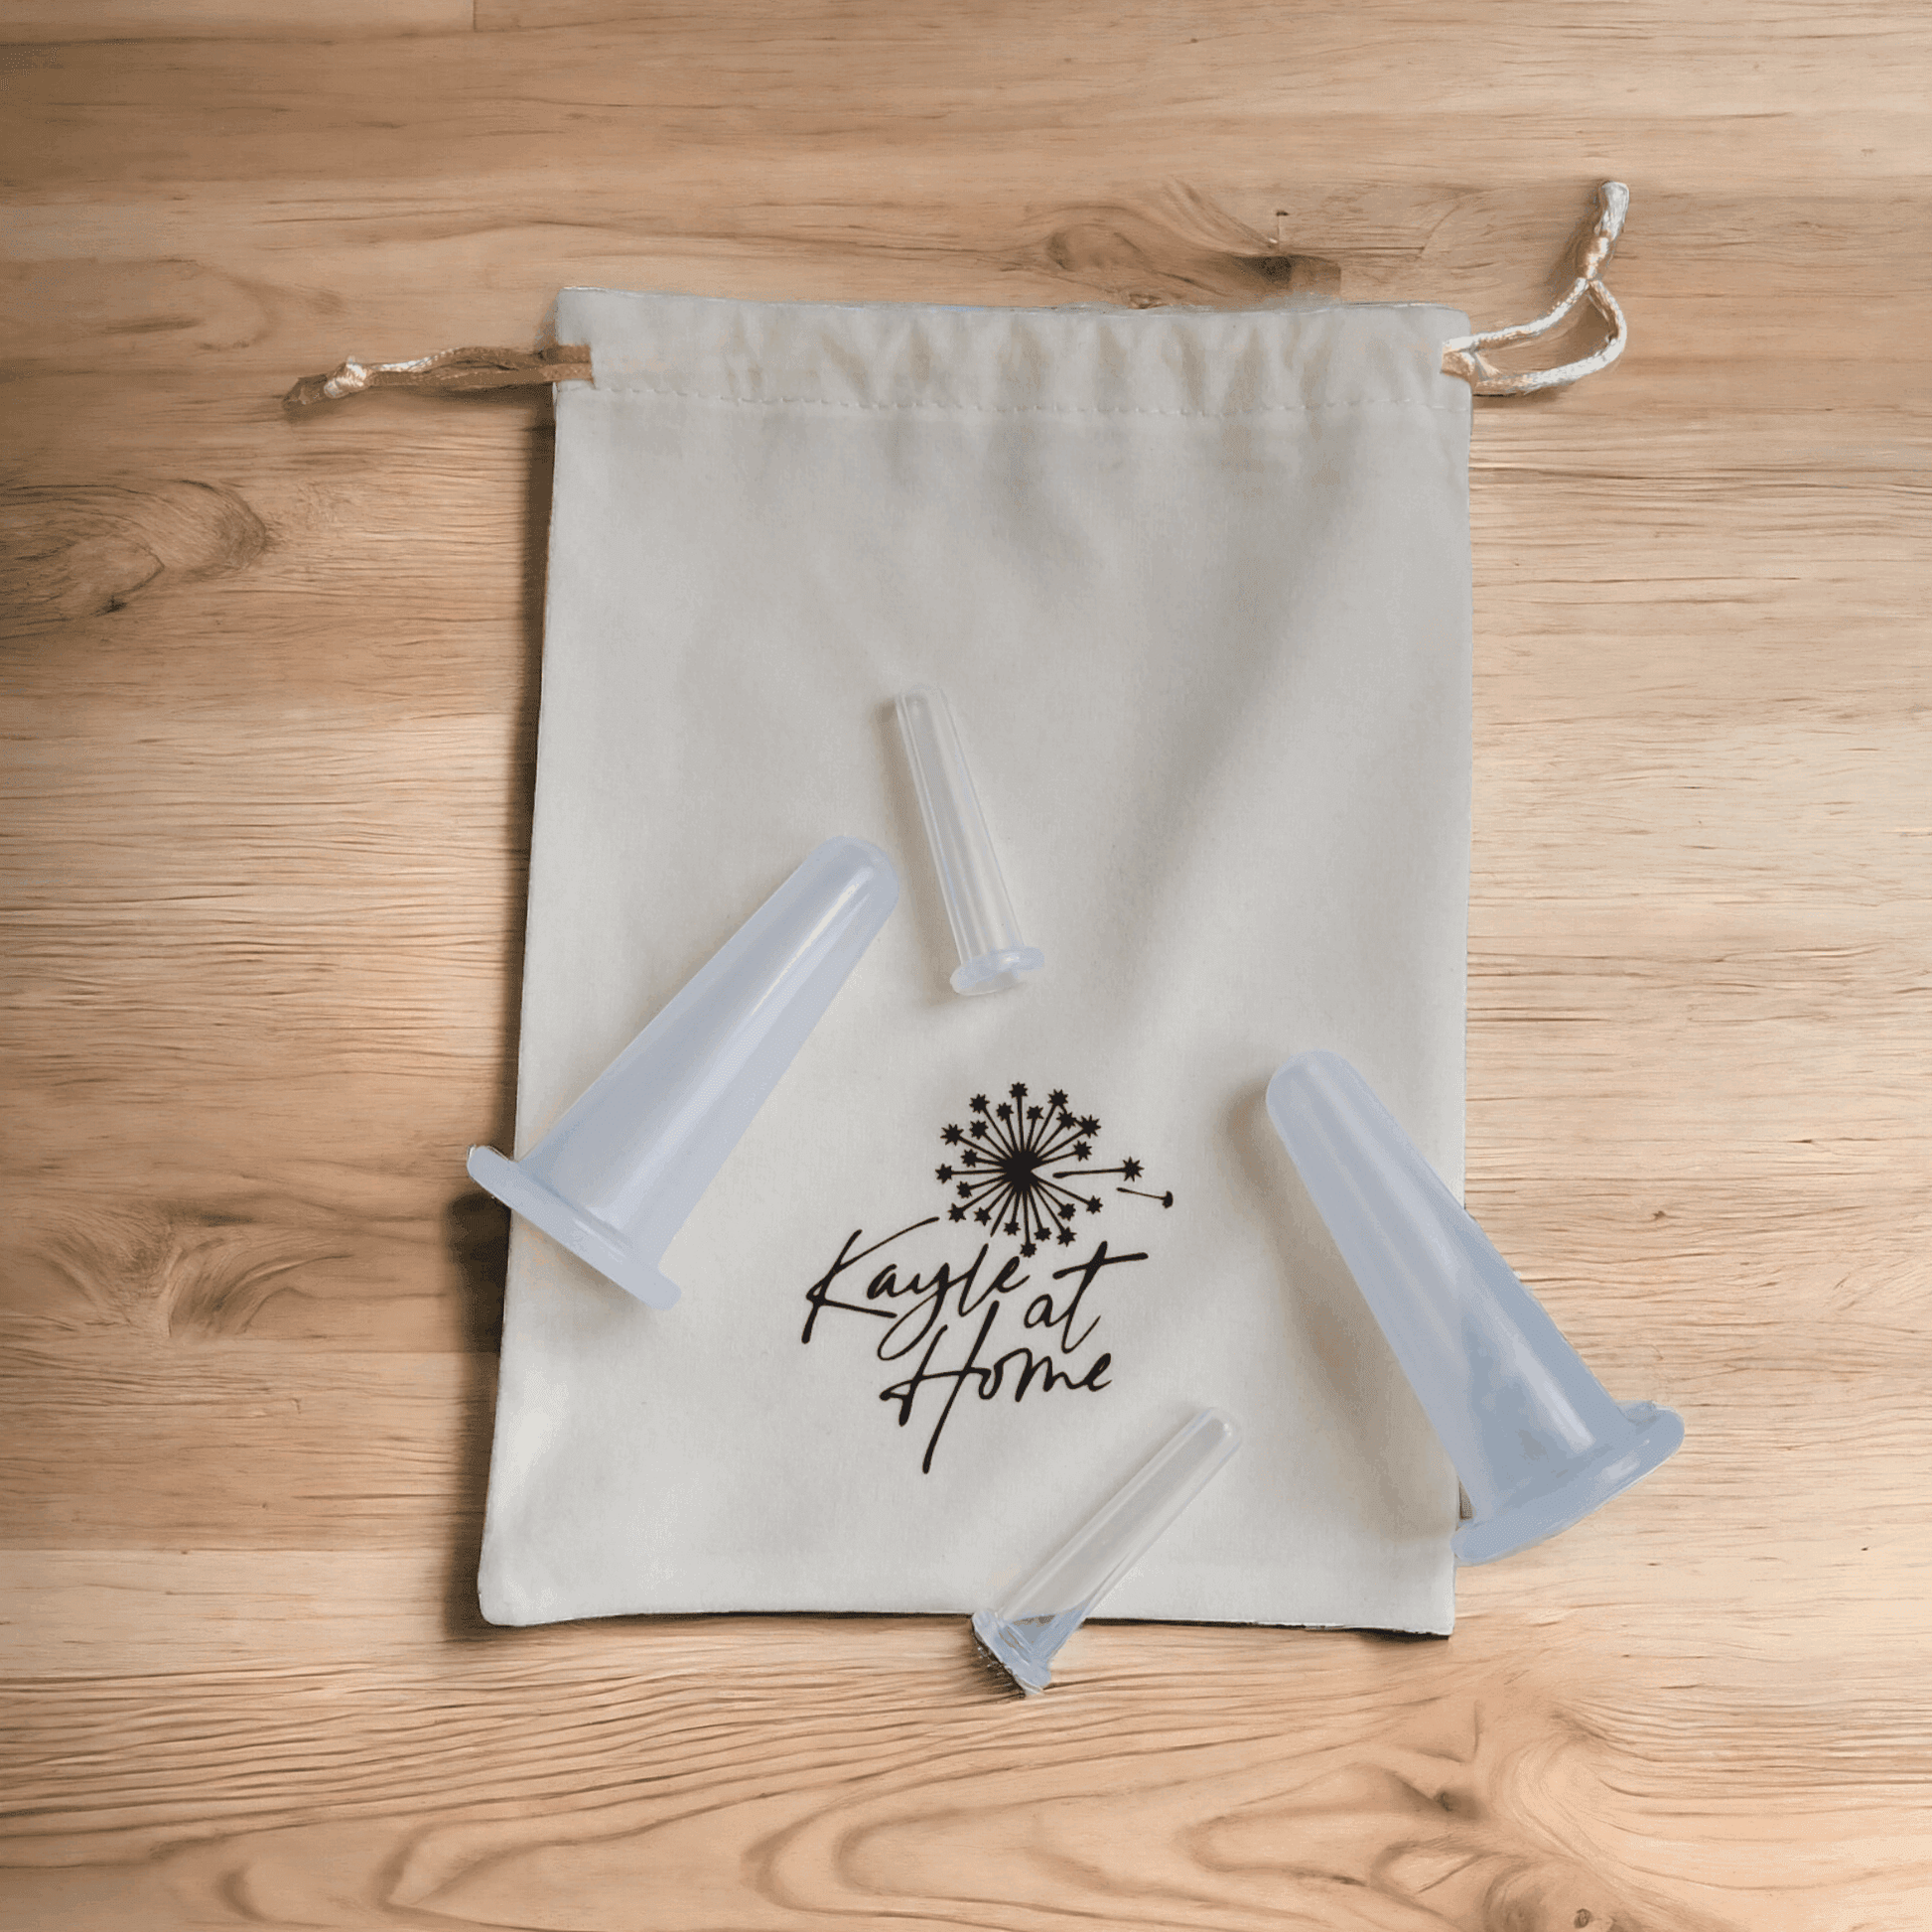 a drawstring bag with cupping tools on top of it